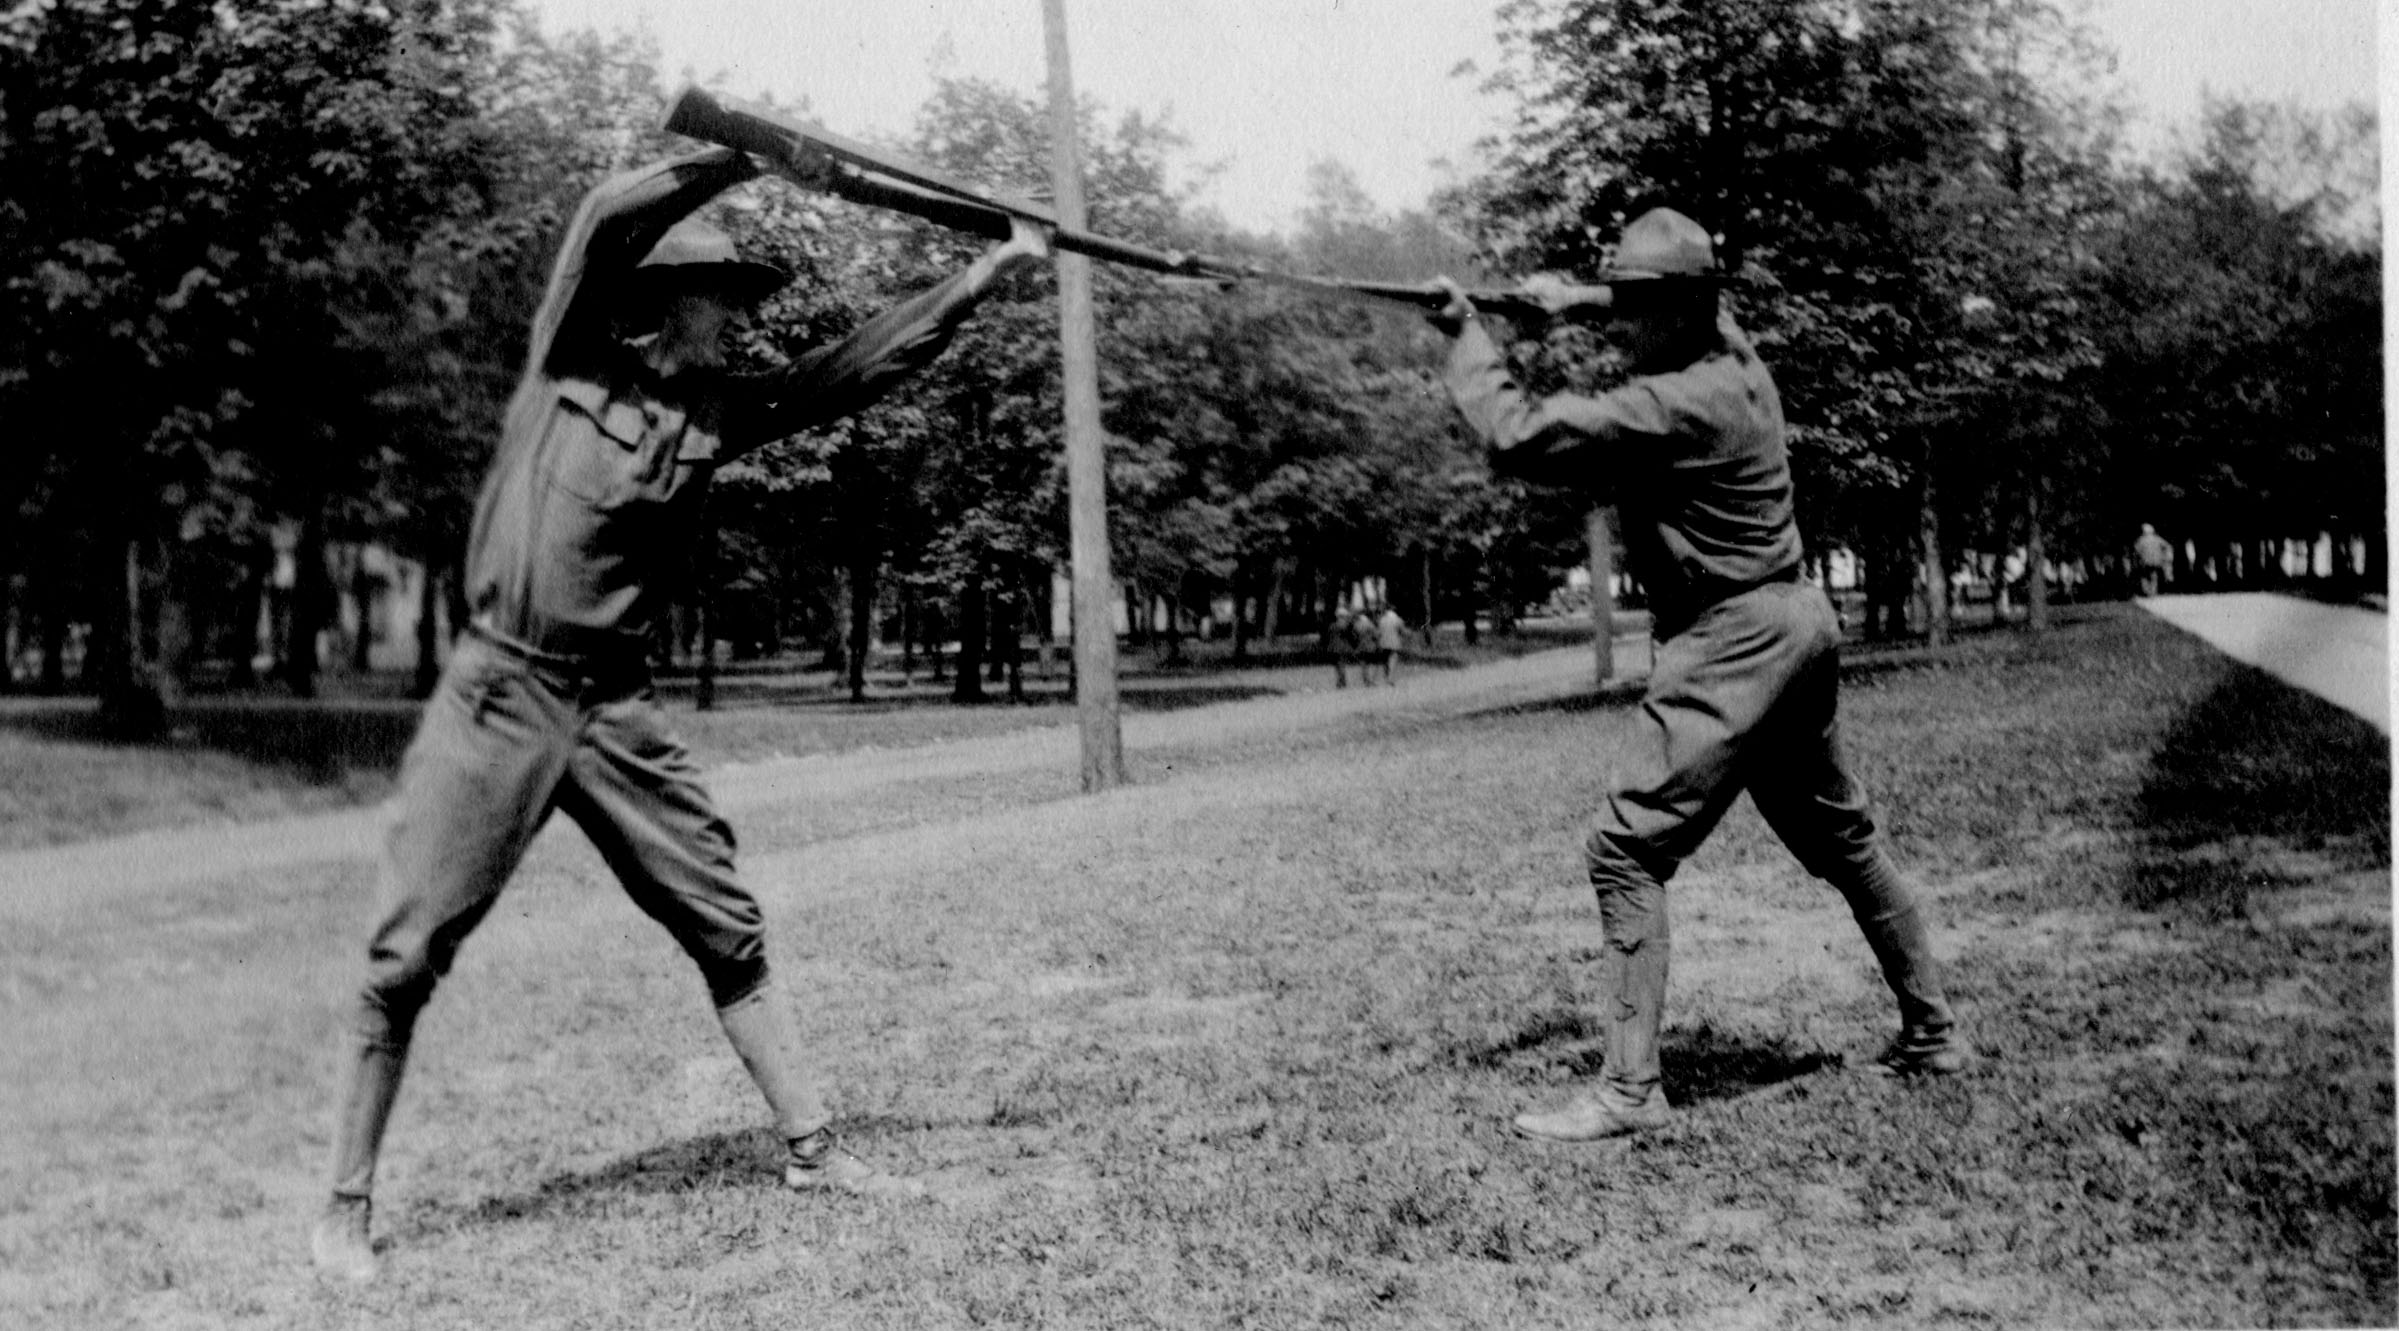 Soldiers Practicing Bayonet Fighting, circa 1918